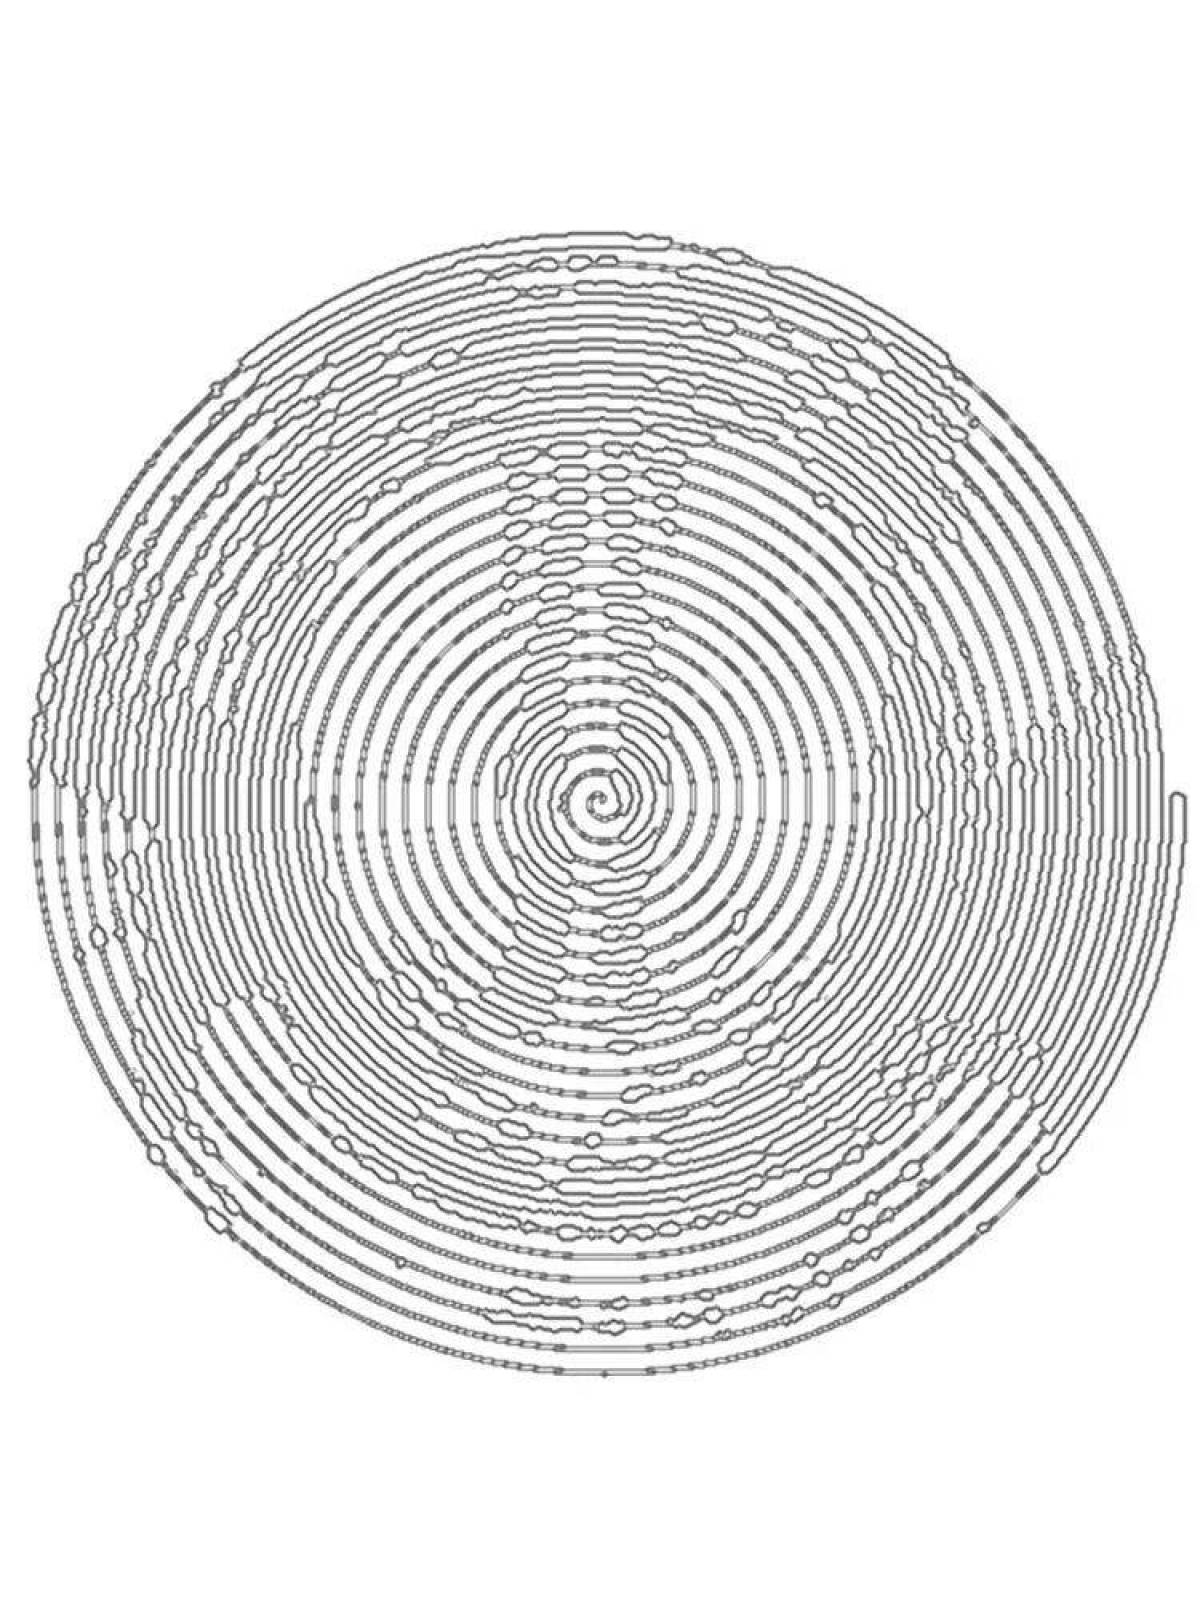 Detailed spiral in coloring circle